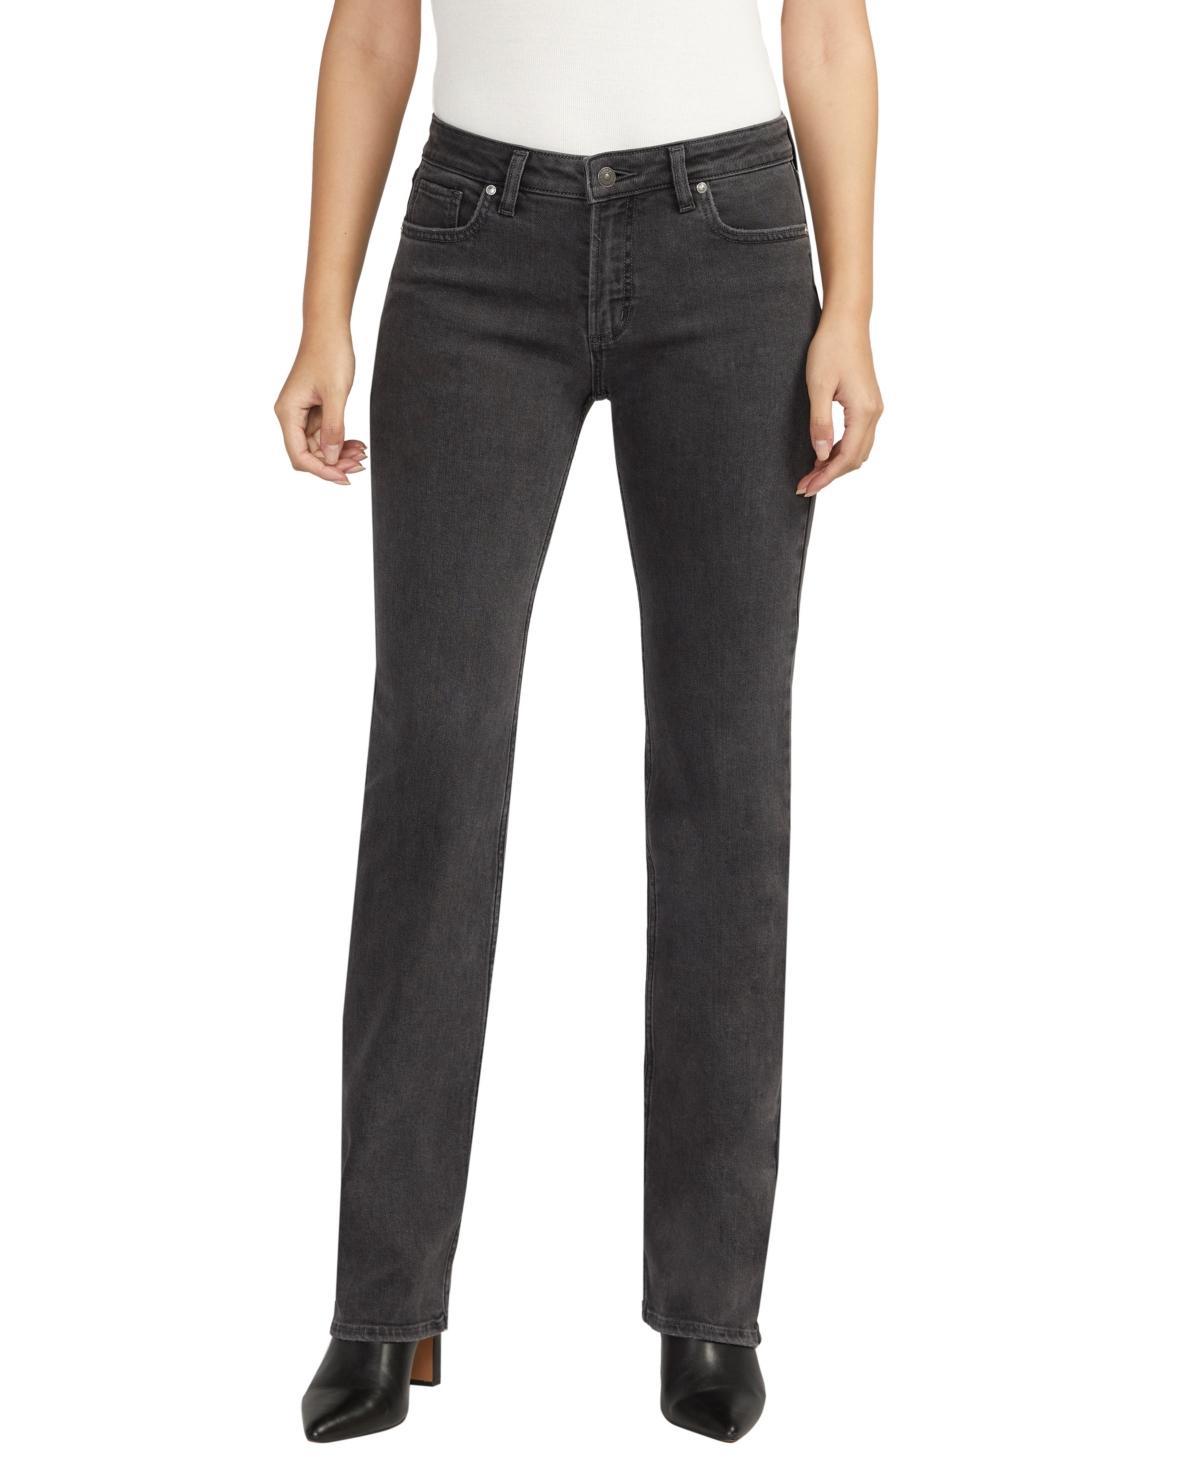 Silver Jeans Co. Be Low Low Rise Bootcut Jeans Product Image